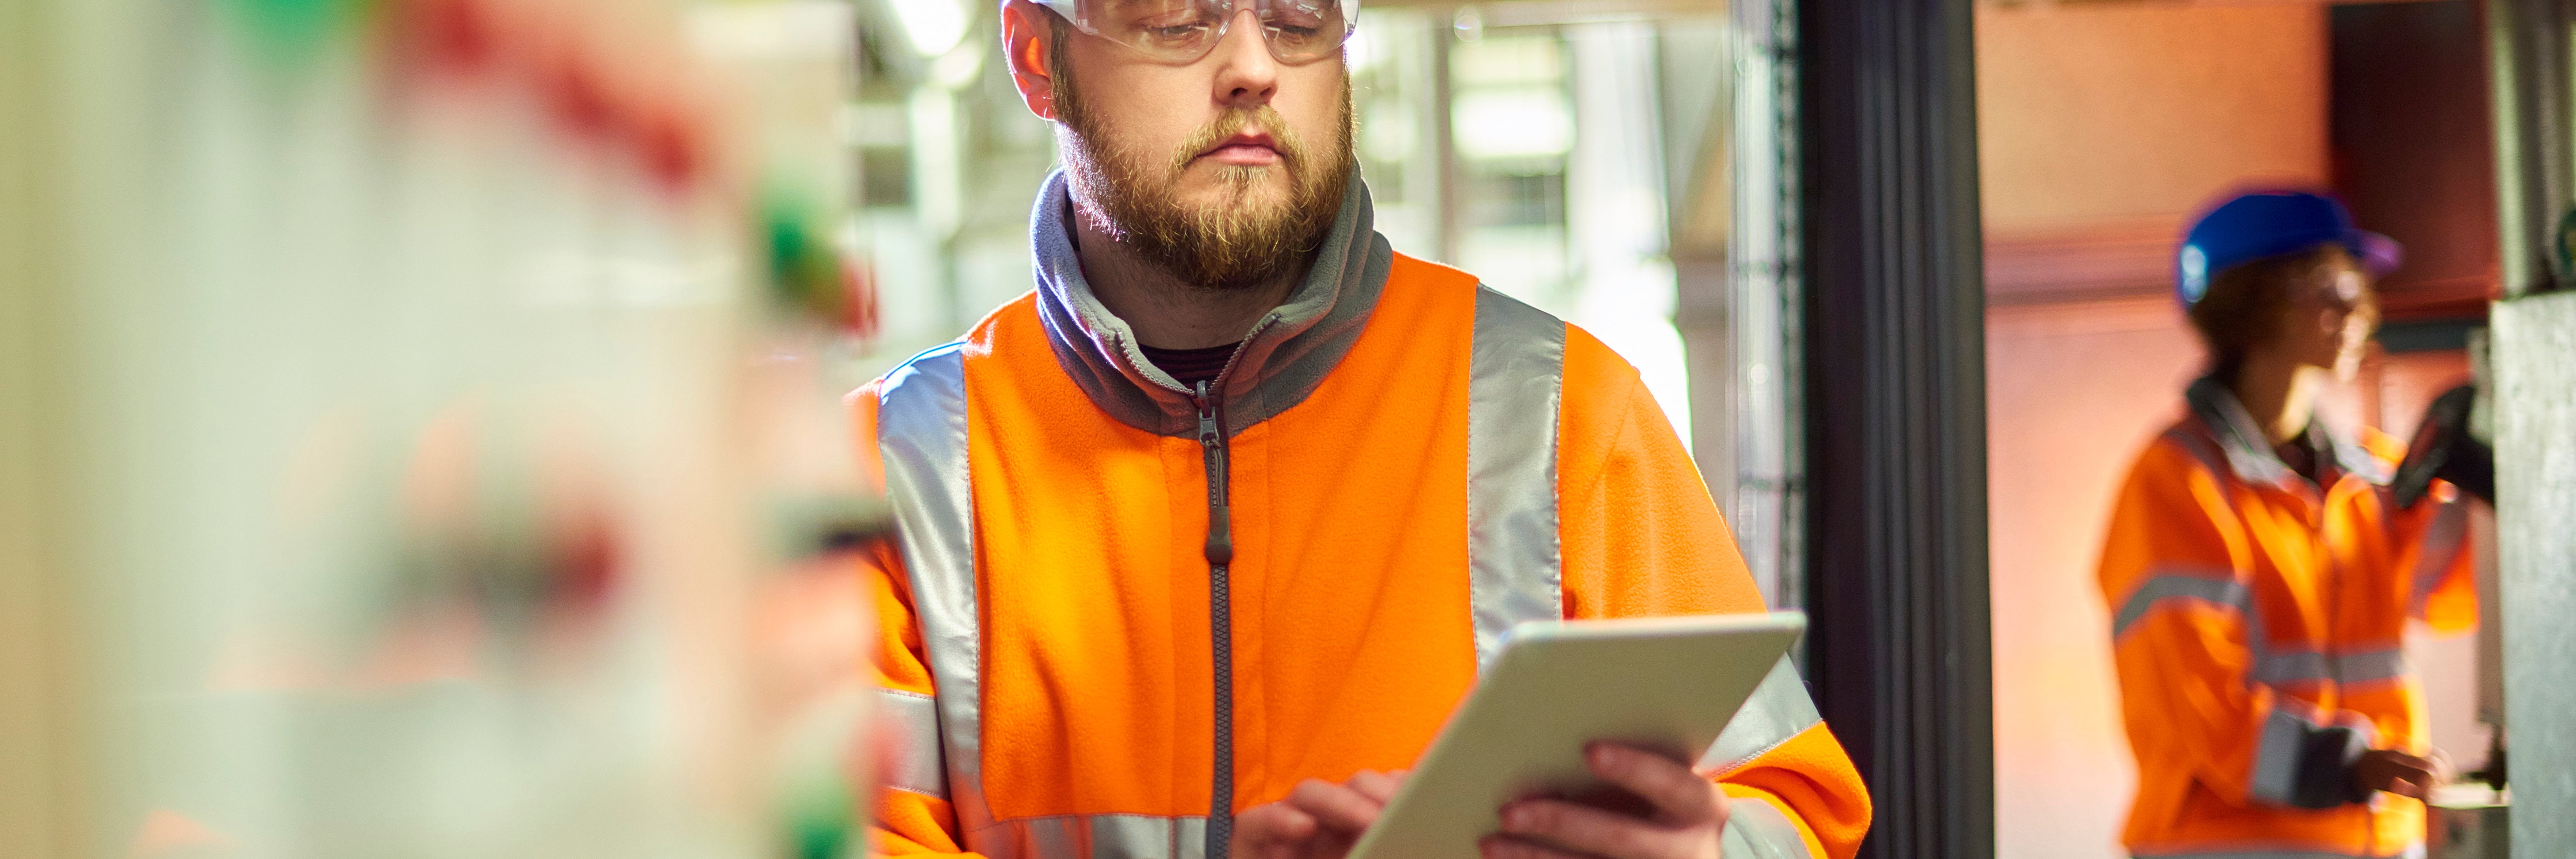 An industrial service engineer conducts a safety check of a control panel in a boiler room. He is wearing hi vis, hard hat, safety glasses and holding a digital tablet as he conducts a safety inspection.